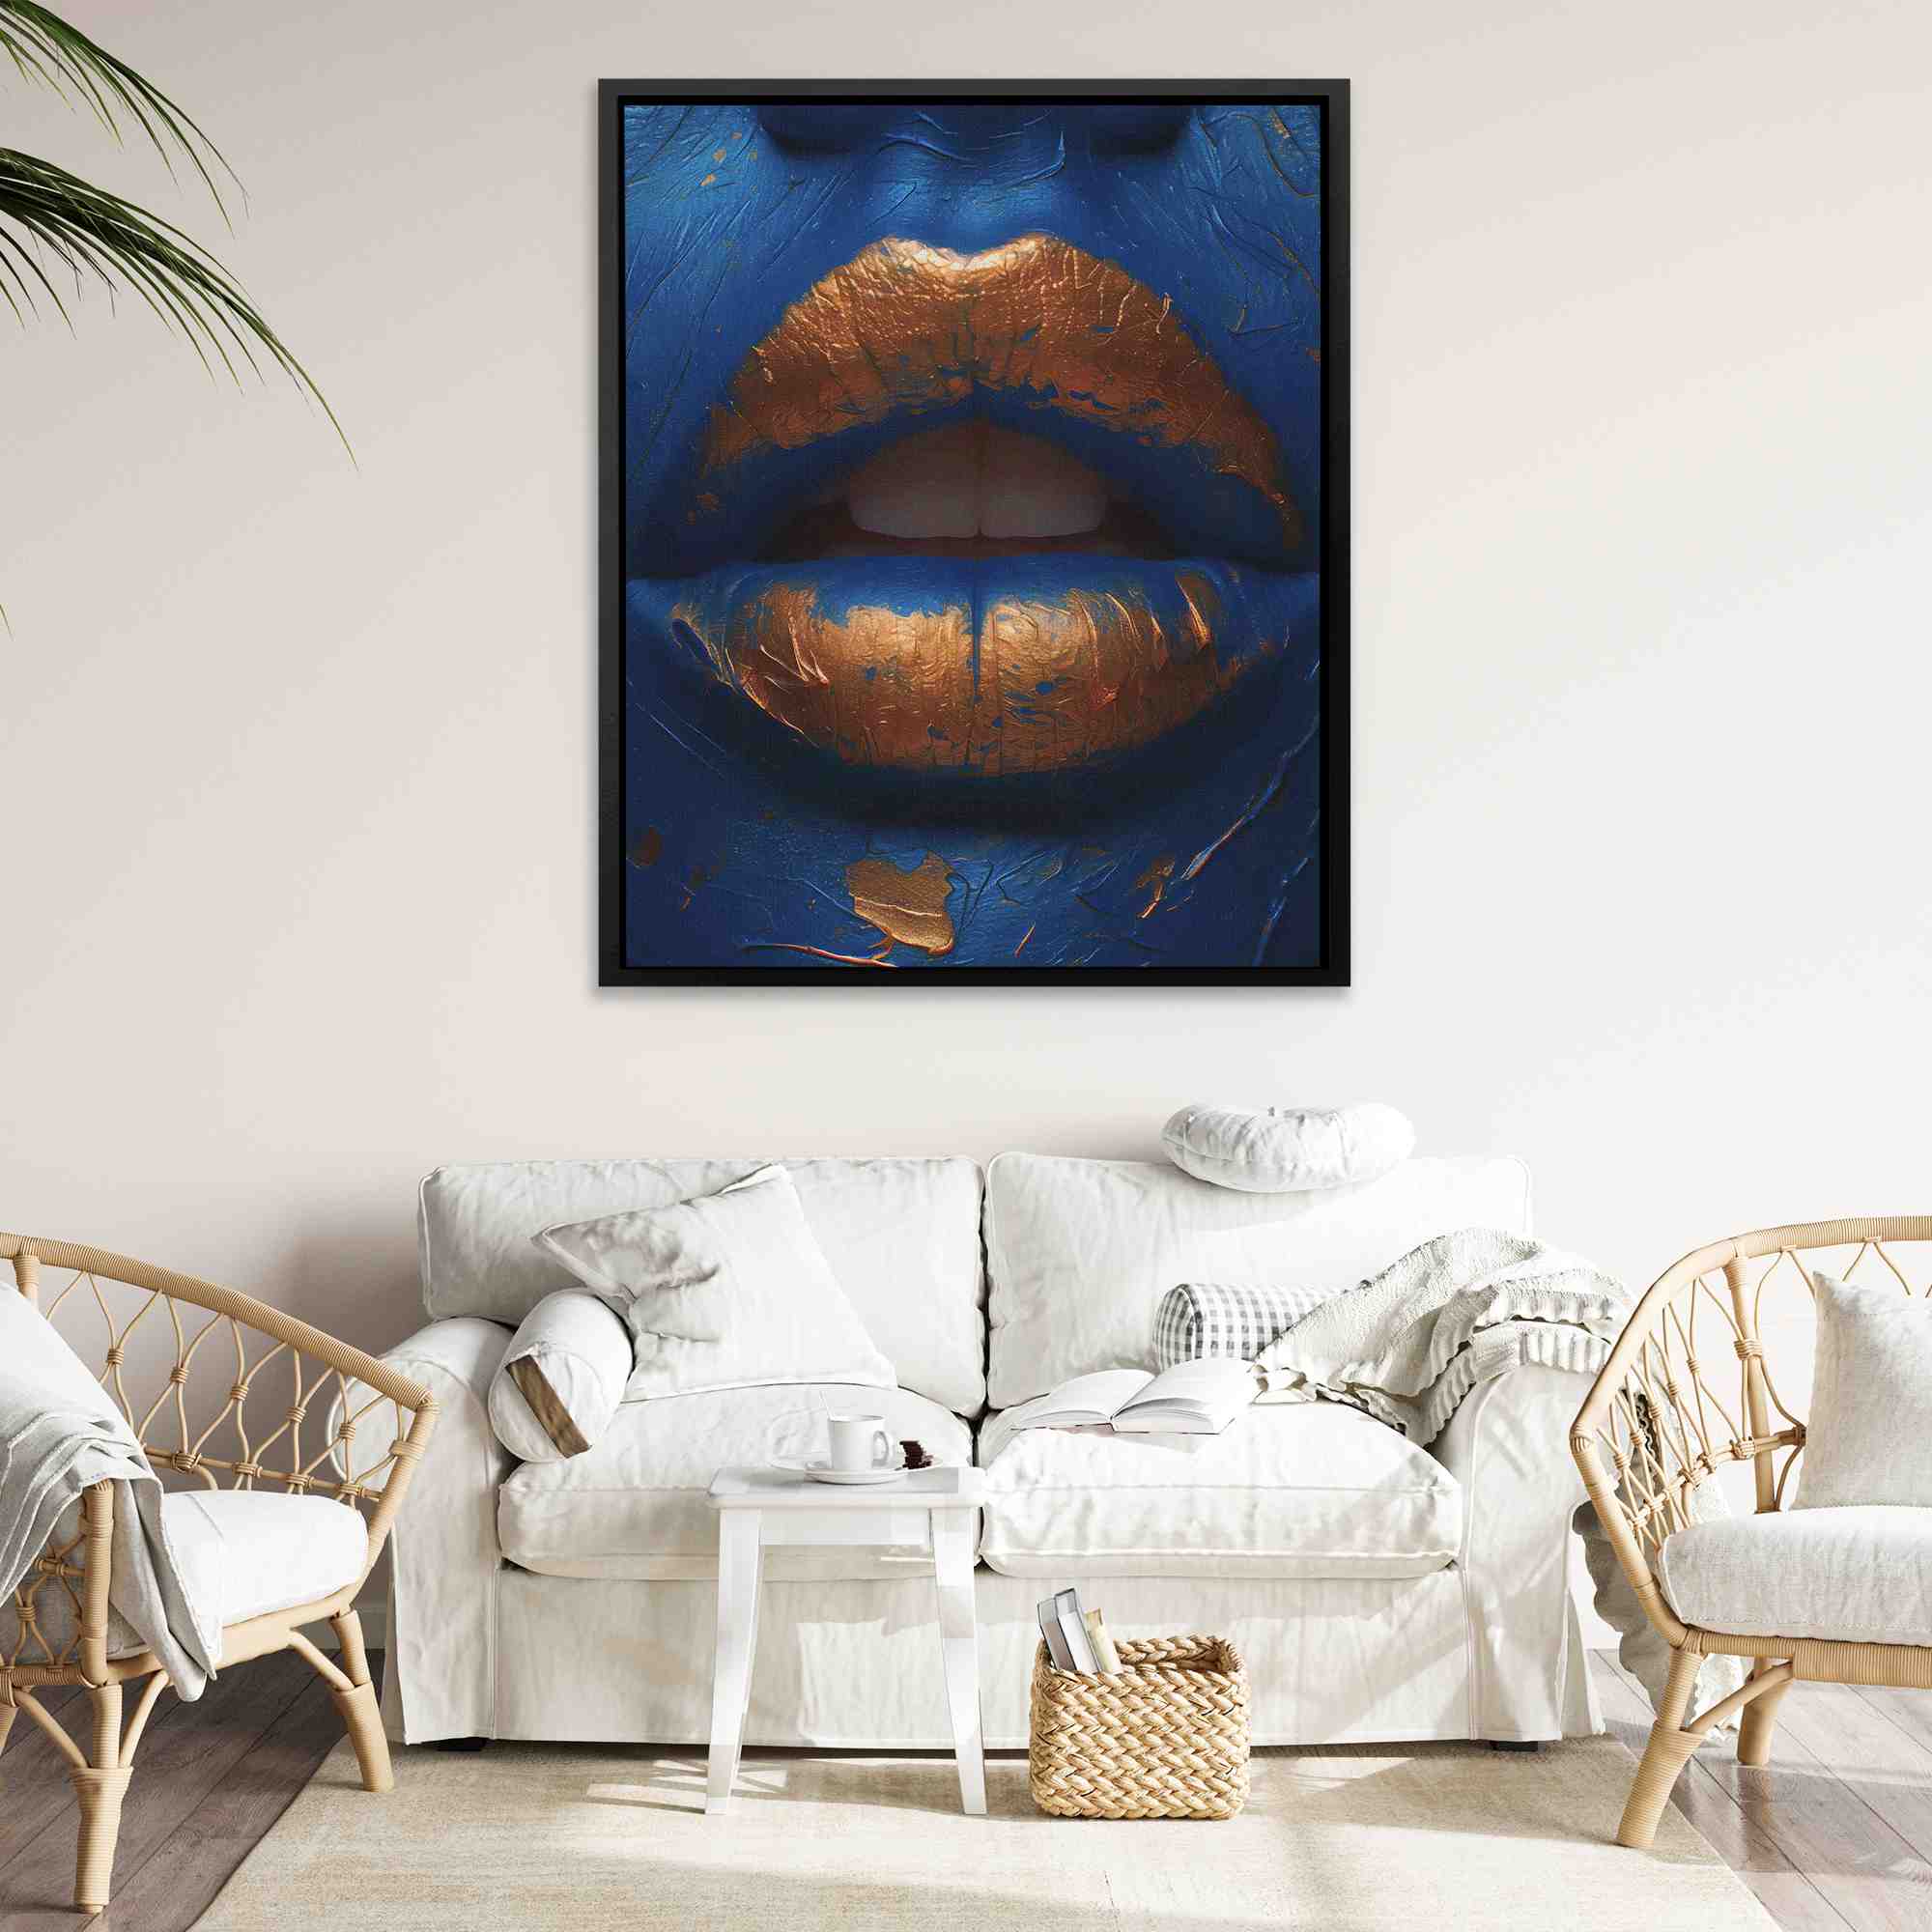 a close up of a blue and gold lips